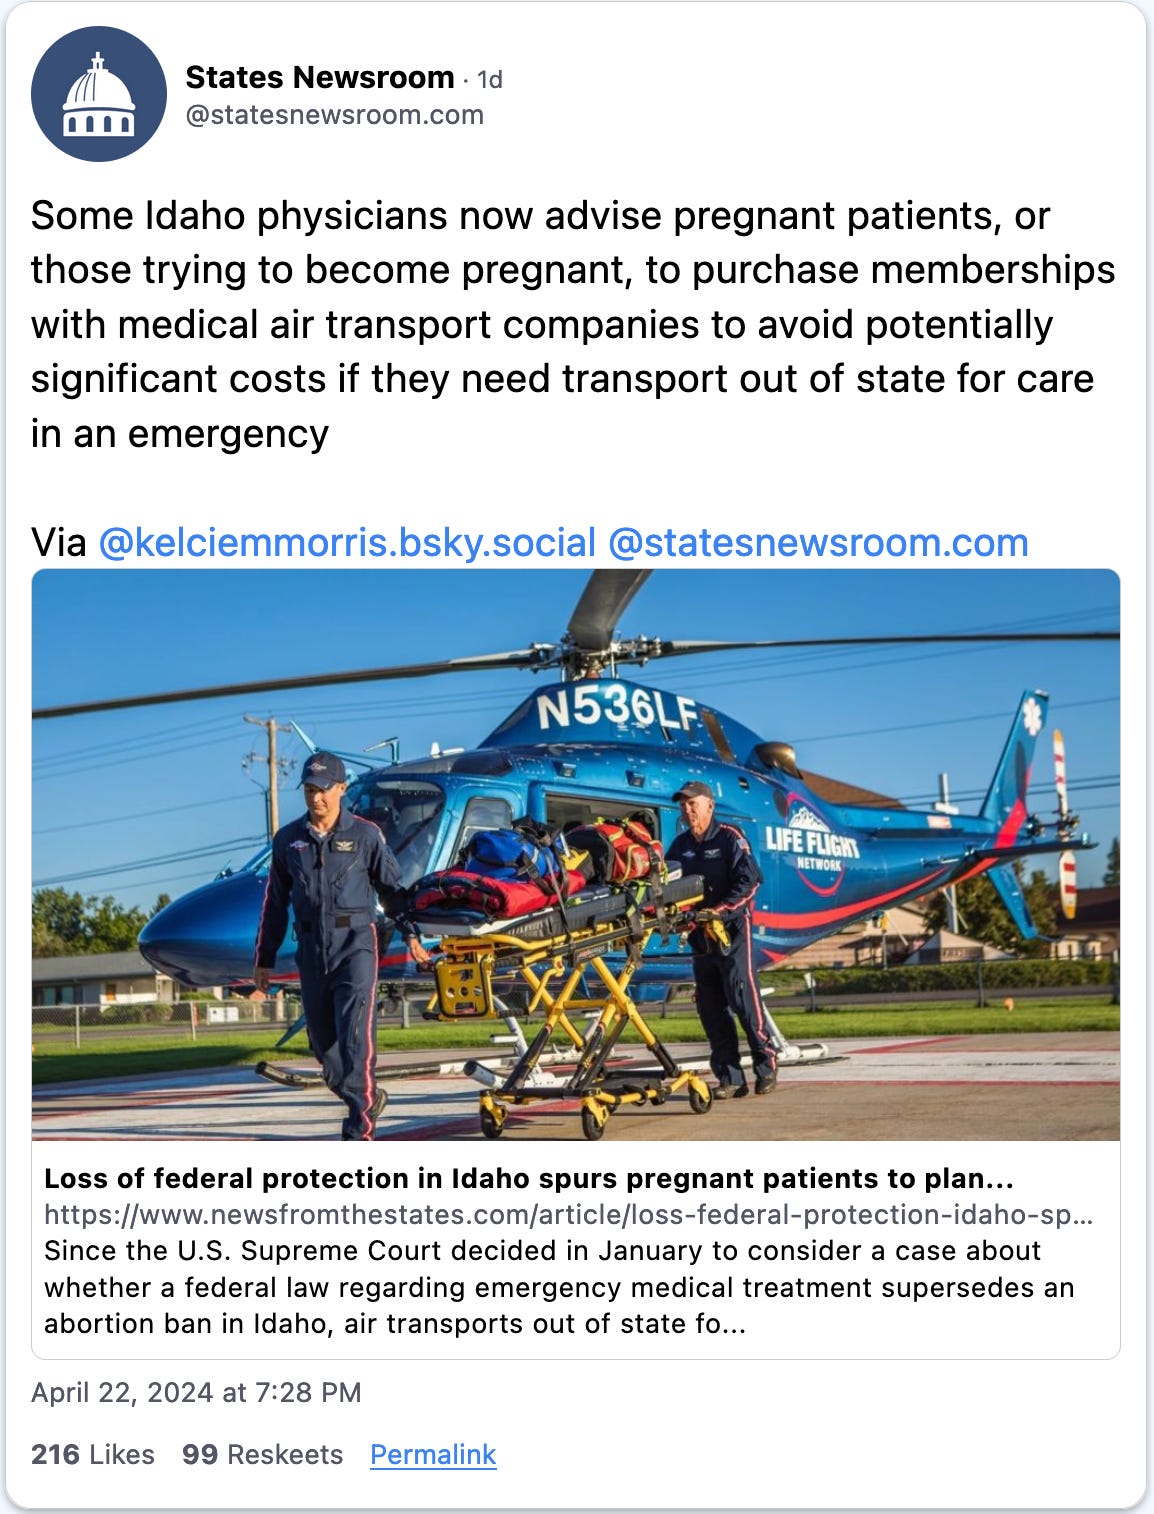 April 22, 2024 Bluesky post from States Newsroom reading, "Some Idaho physicians now advise pregnant patients, or those trying to become pregnant, to purchase memberships with medical air transport companies to avoid potentially significant costs if they need transport out of state for care in an emergency."